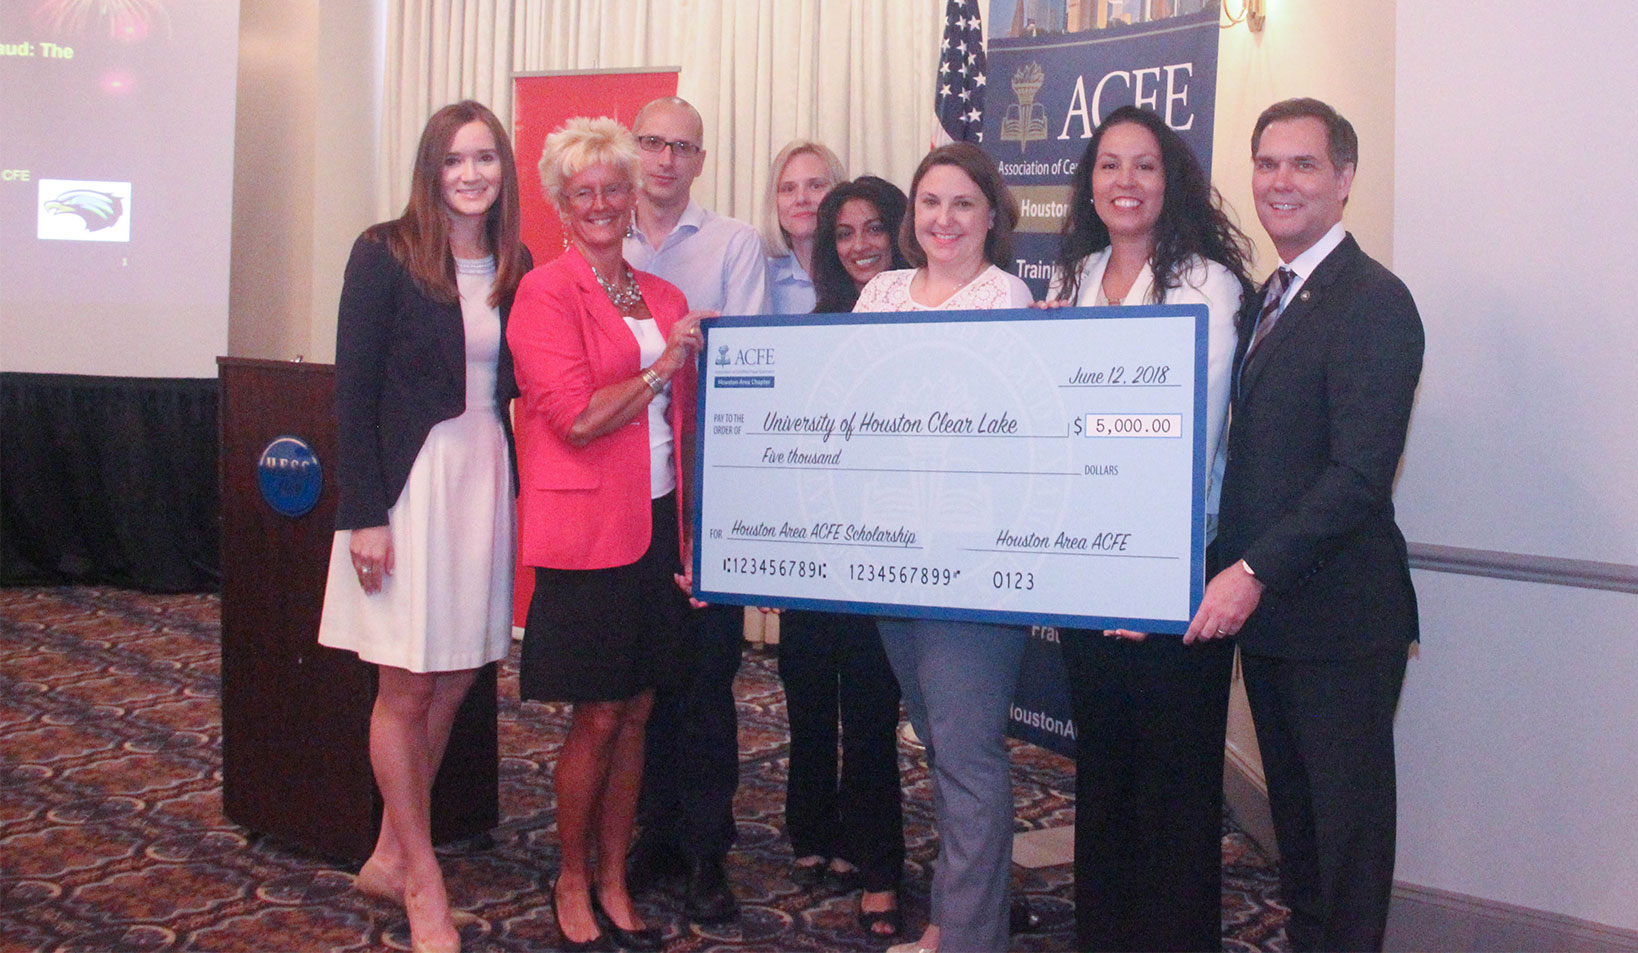 IMAGE: UHCL alumni and ACFE members hold scholarship money at June 12 meeting. Pictured from left to right: Katherine Avery Guillot, Dr. Constance Lehmann, Stephen Sutton, Gwendolyn Haley, Elbby Antony, Jessica Stansel, Chrysti Ziegler, Bruce Dorris.